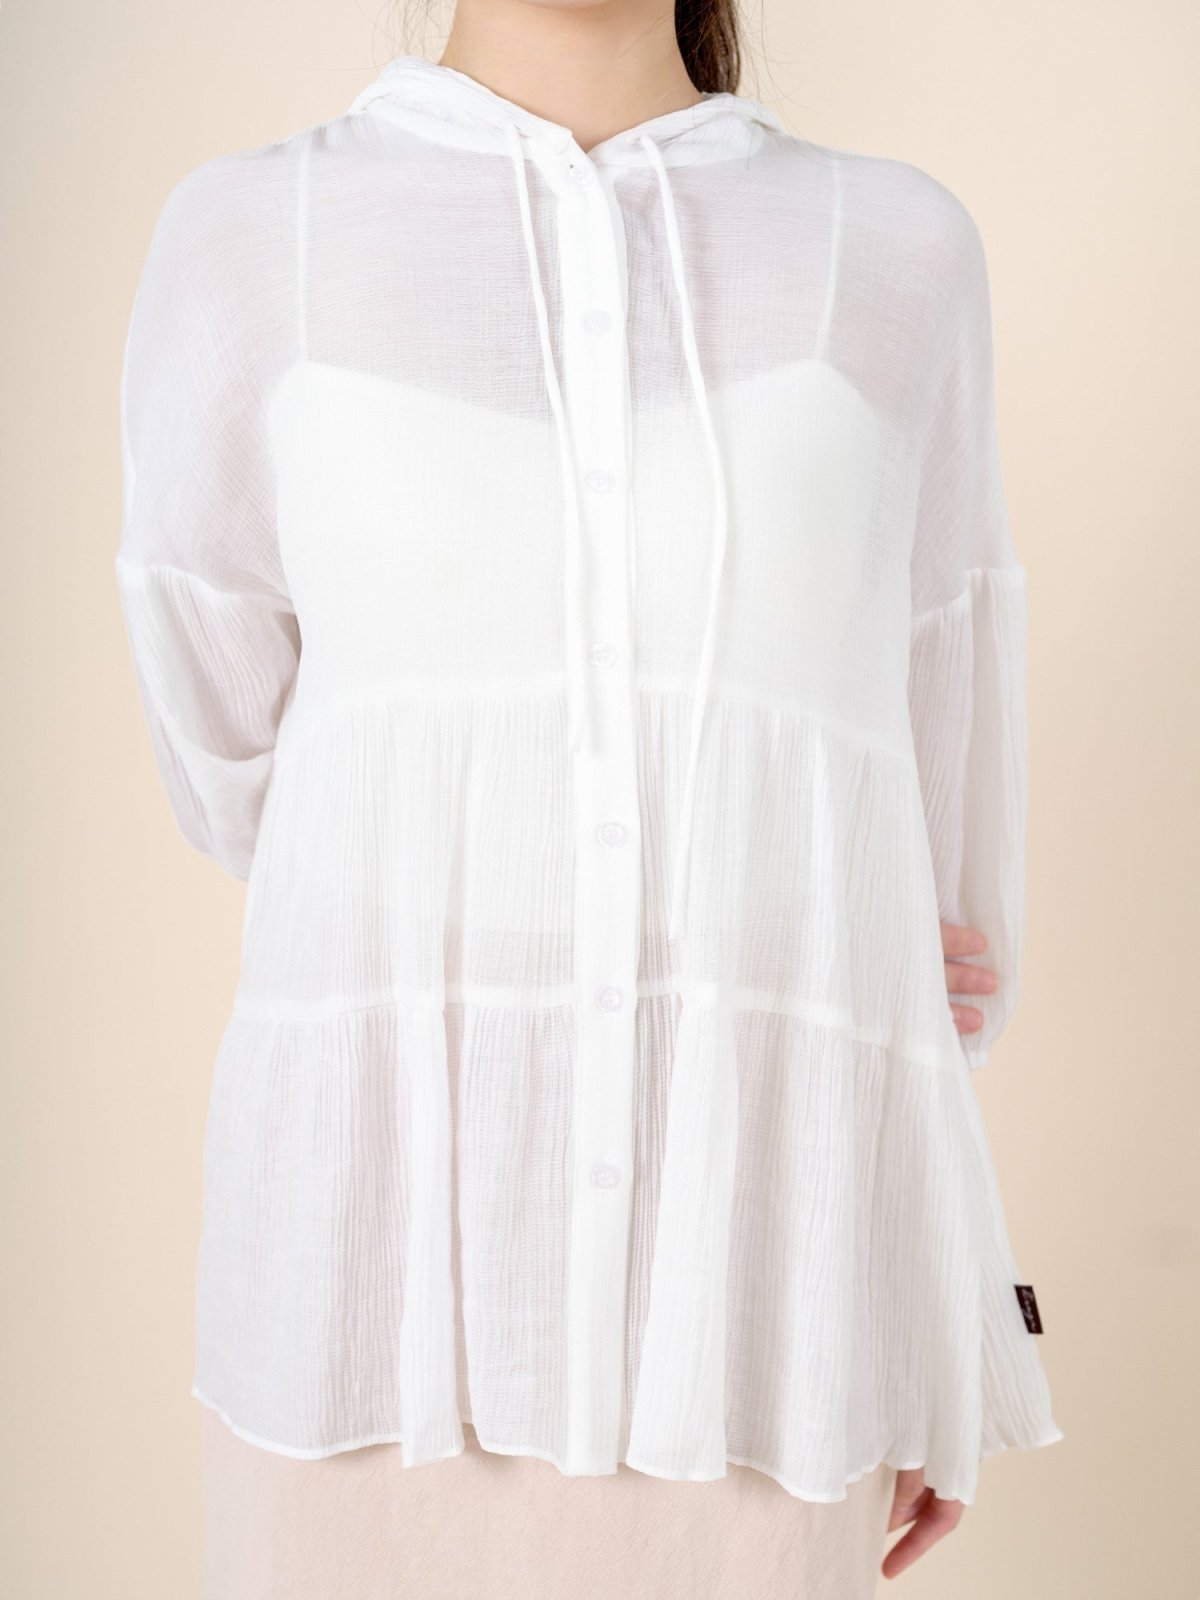 Tiered Button-up Top - DAG-DD8796-21WhiteF - Mochi Ivory - F - D'ZAGE Designs